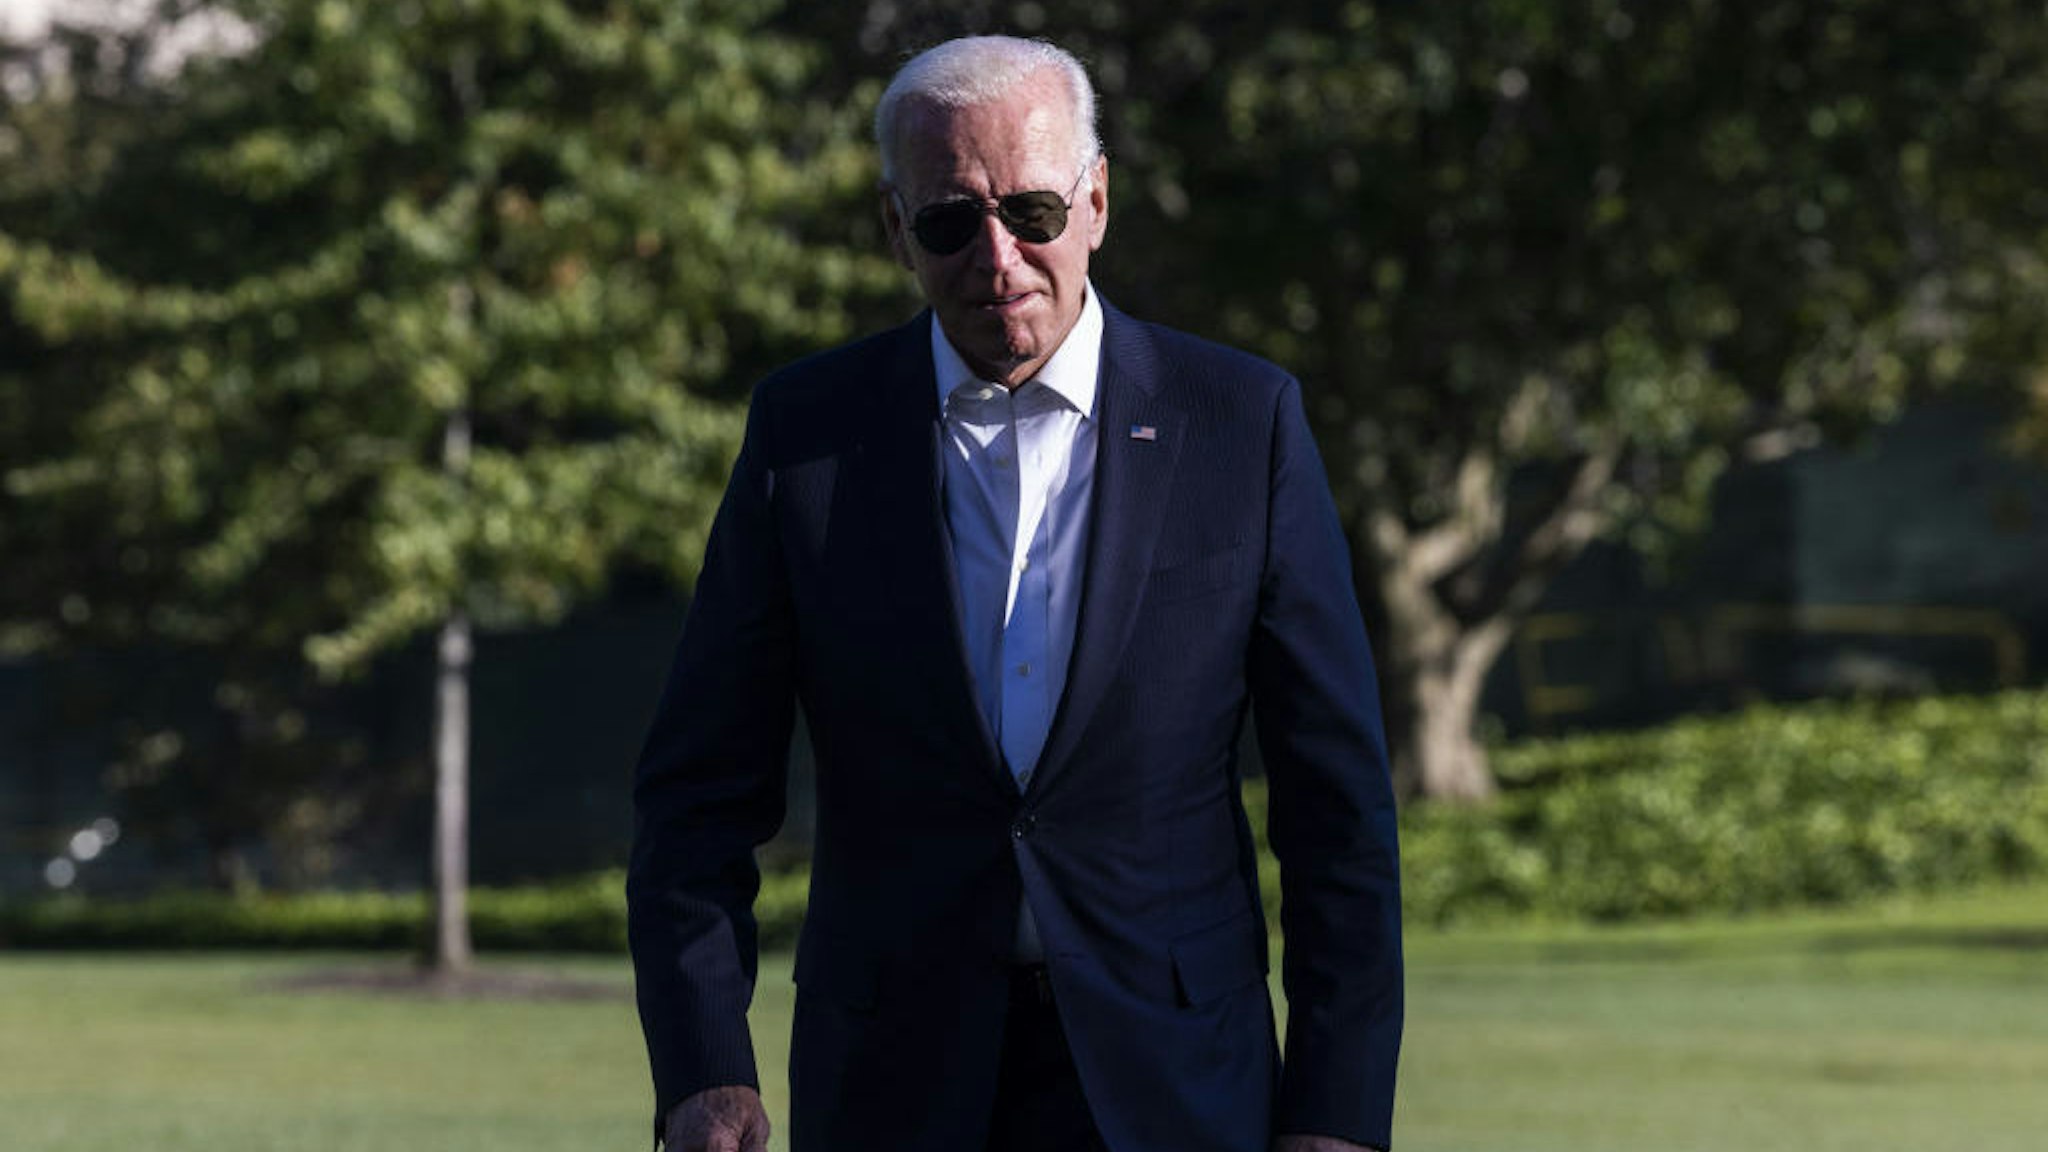 U.S. President Joe Biden walks on the South Lawn of the White House after arriving on Marine One in Washington, D.C., U.S., on Sunday, Sept. 26, 2021. The House Budget Committee advanced a draft version of Biden's signature tax and social spending measure, a milestone ahead of possible votes on the floor of the chamber next week. Photographer: Jim Lo Scalzo/EPA/Bloomberg